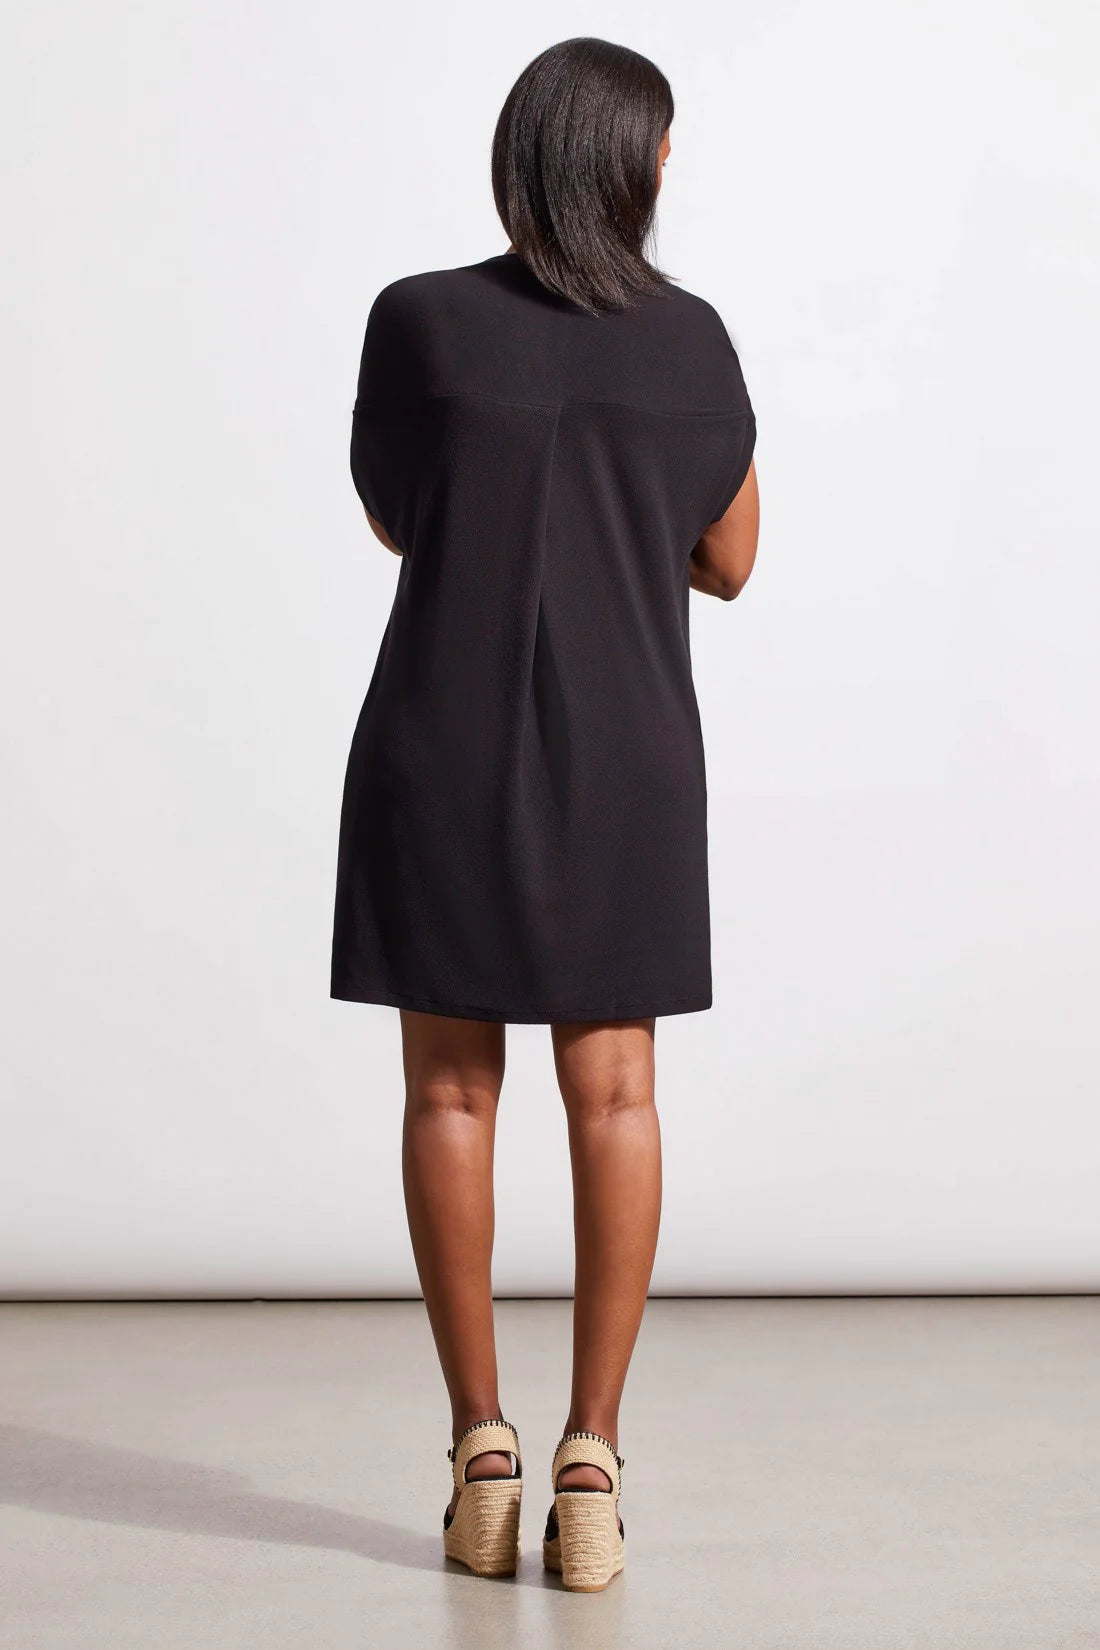 Styled with an airy fit and textured knit fabric, this shift dress is a comfy choice that's still endlessly chic. A notch neckline, short sleeve design, side seam pockets, and a hem that hits above the knees complete the look.